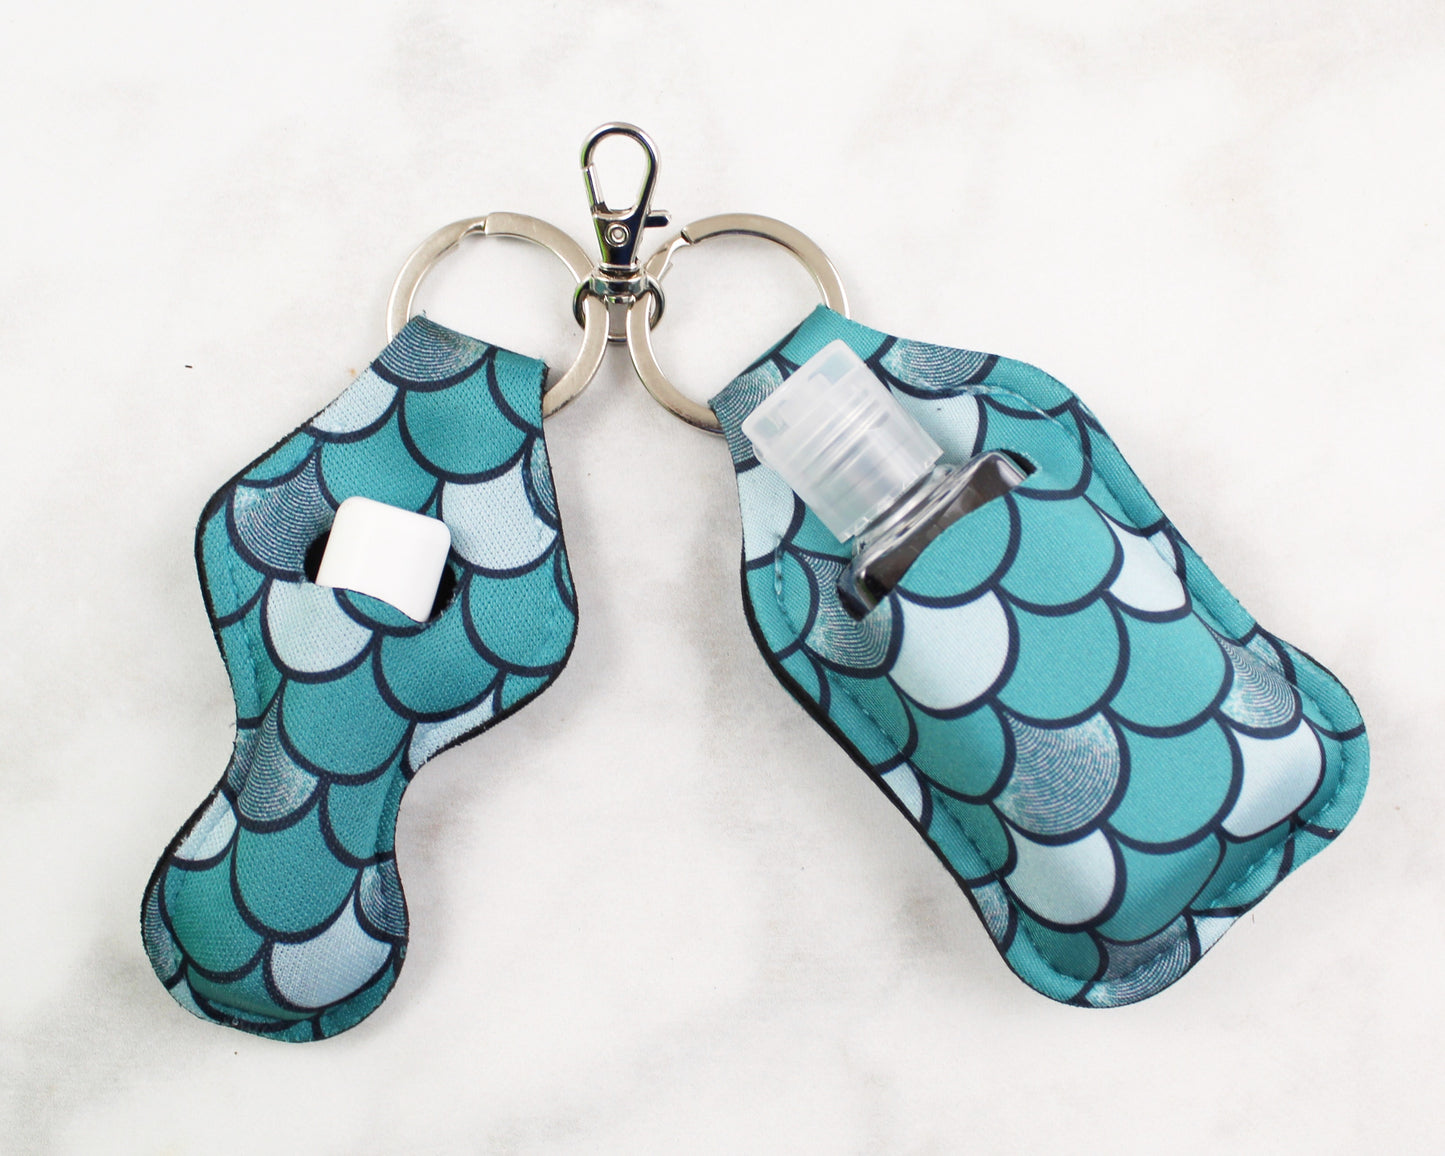 Teal Mermaid Scales Hand Sanitizer and Lip Balm Holders